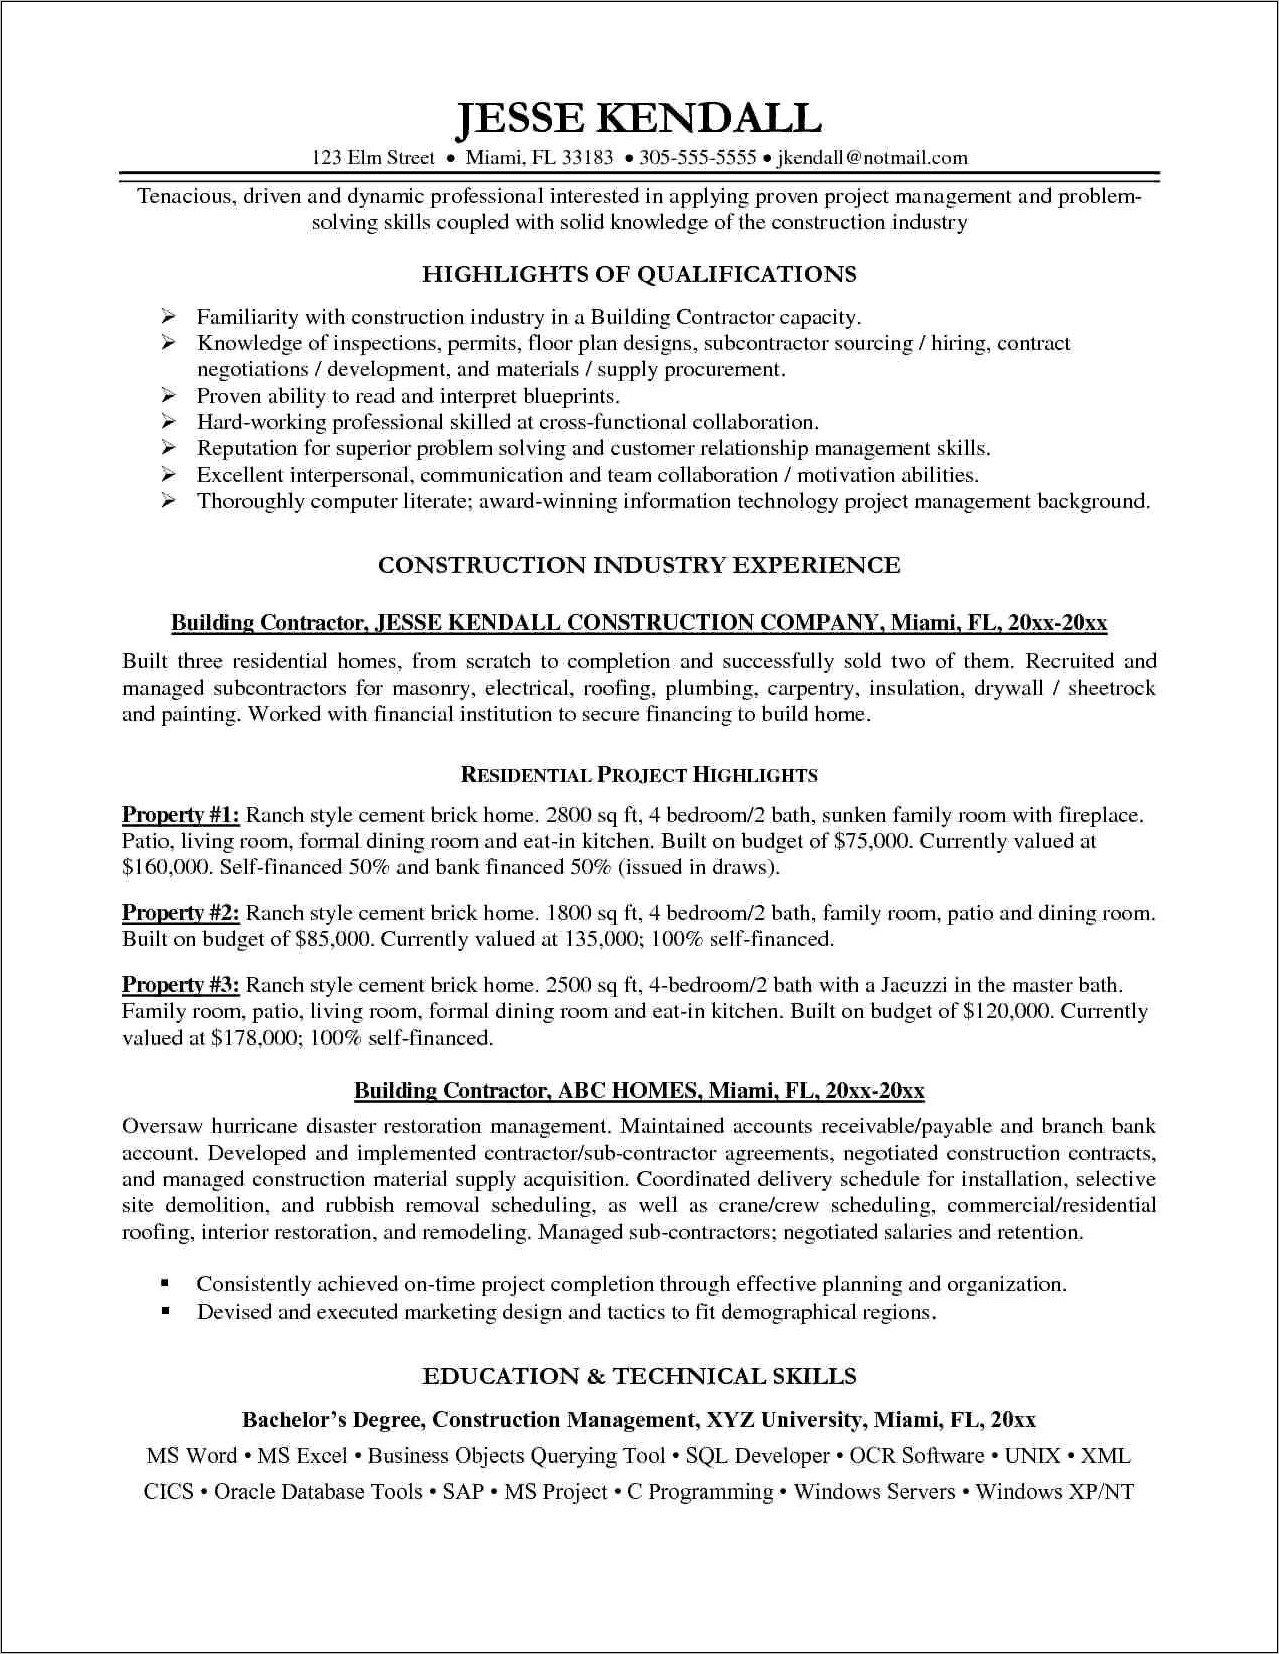 Resume Objective Statements Construction Industry